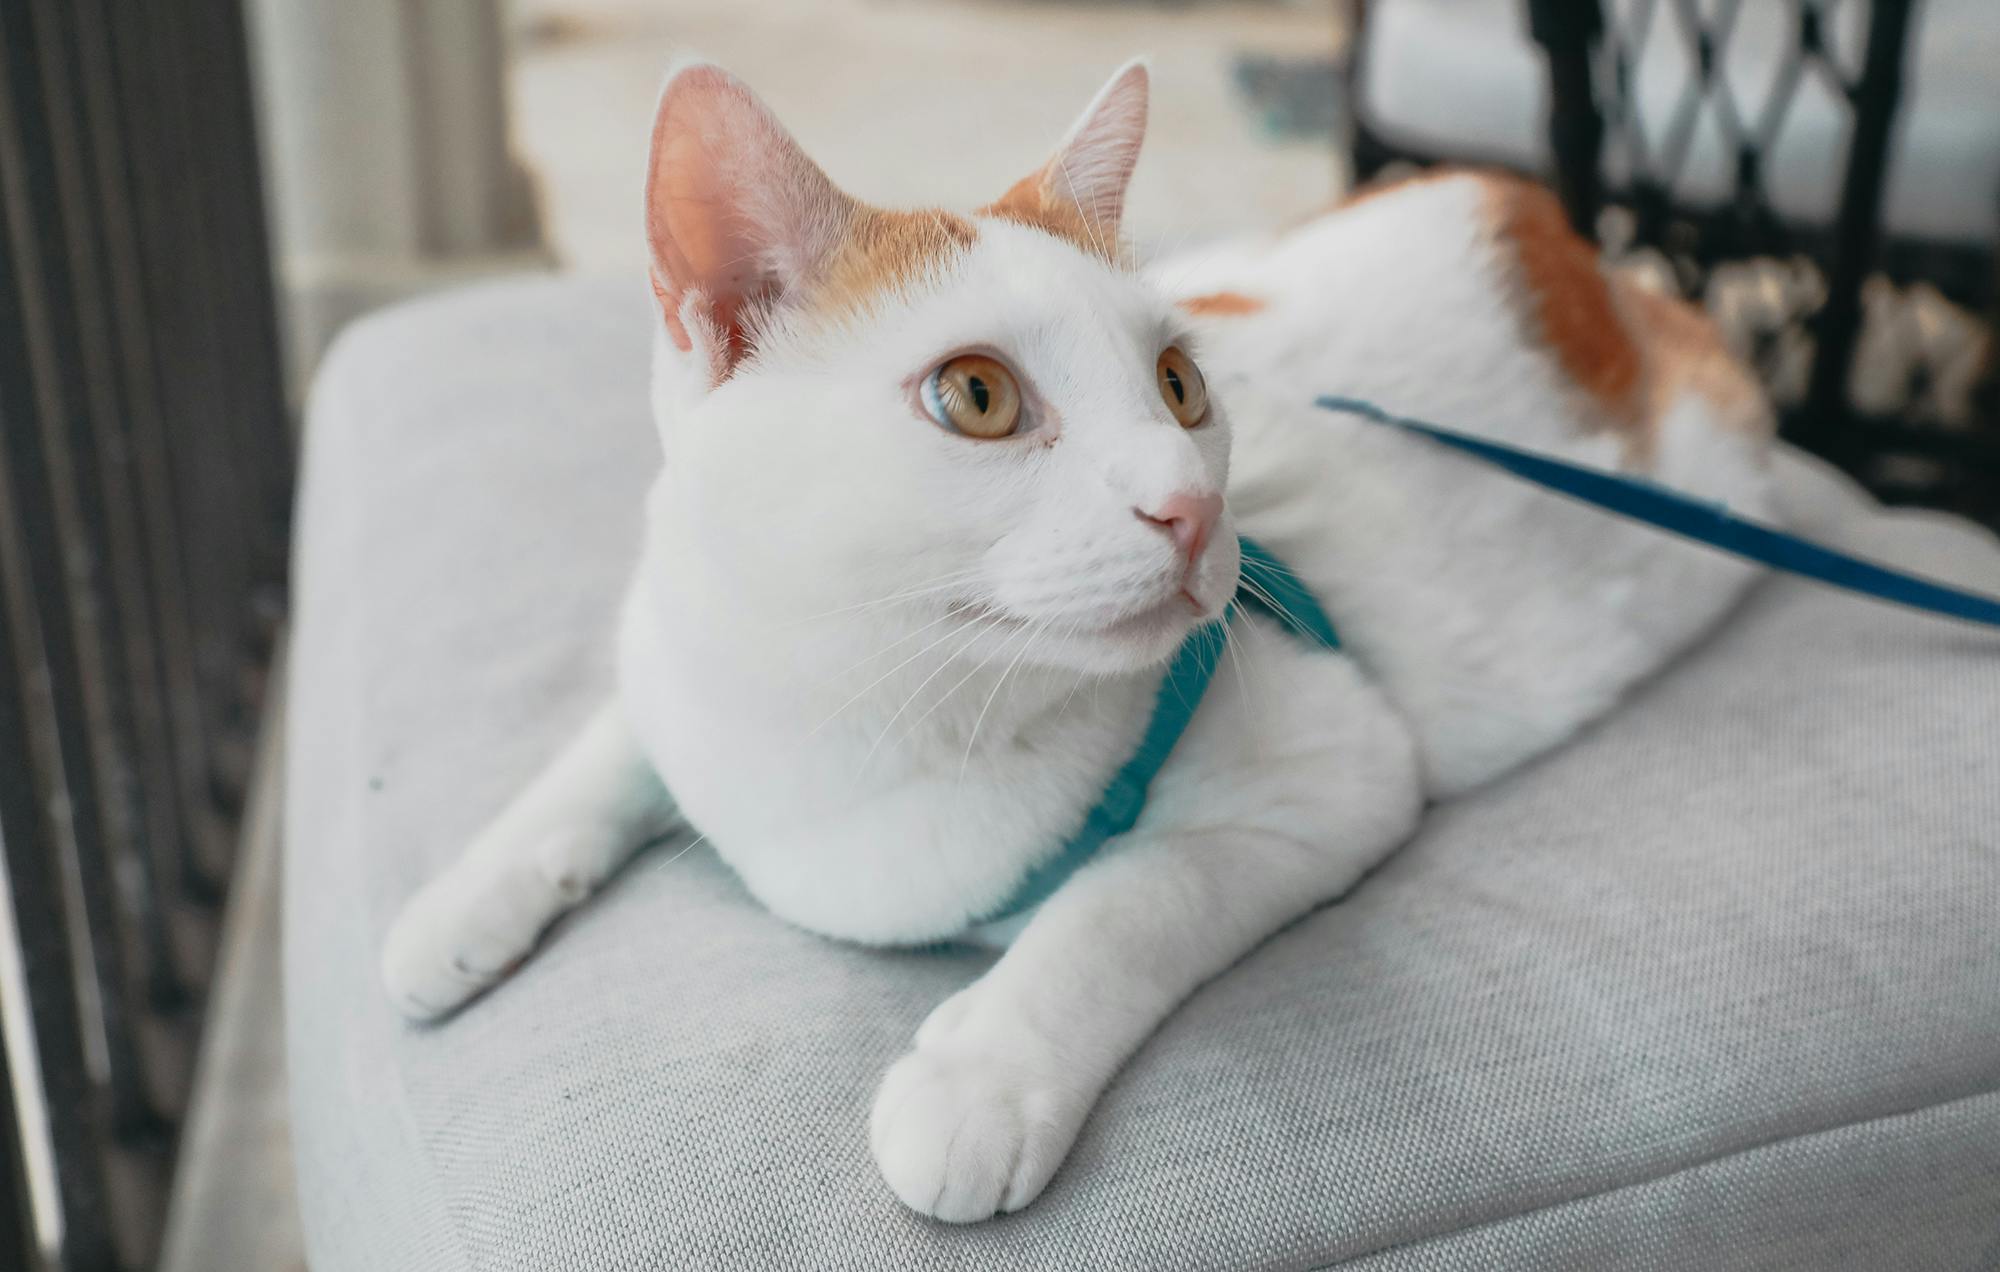 Training Your Cat to Walk on a Leash